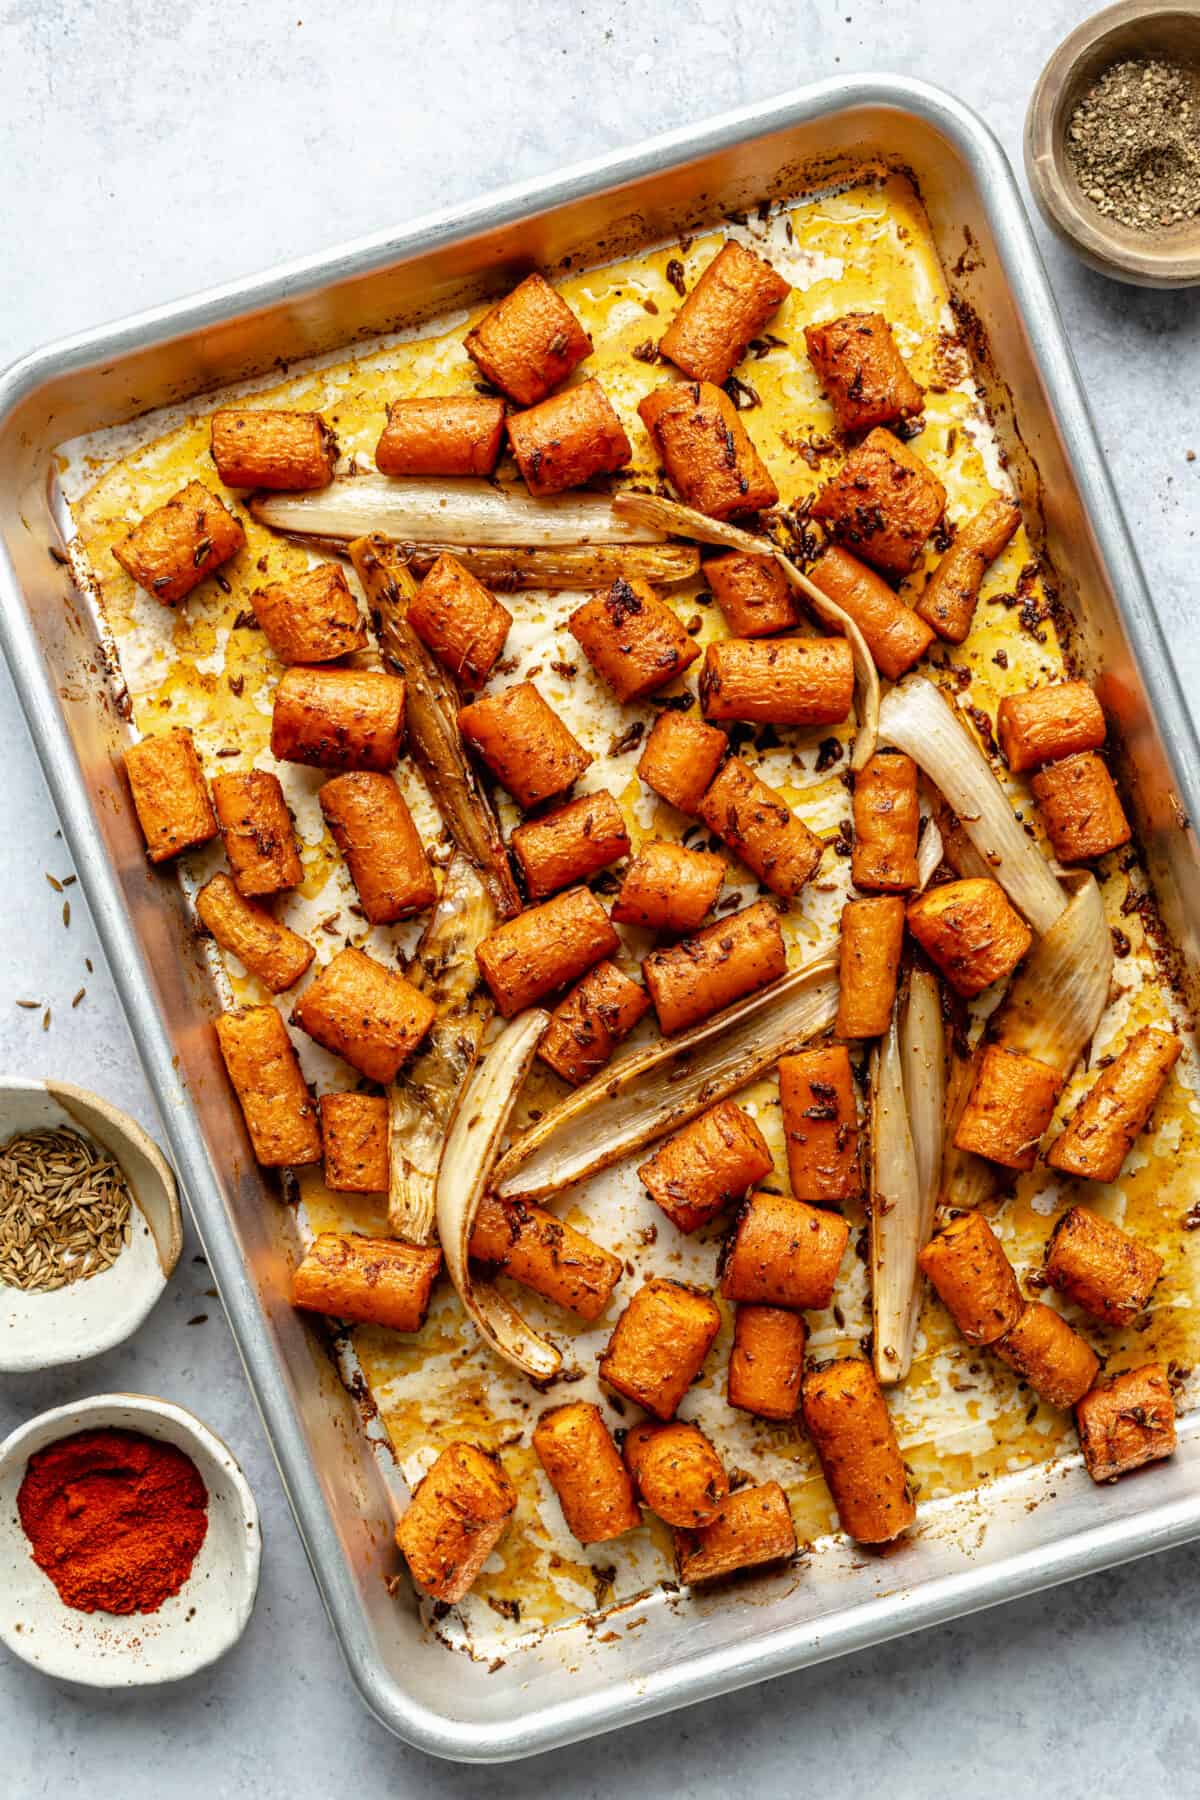 Roasted carrots and shallot on silver sheet pan.